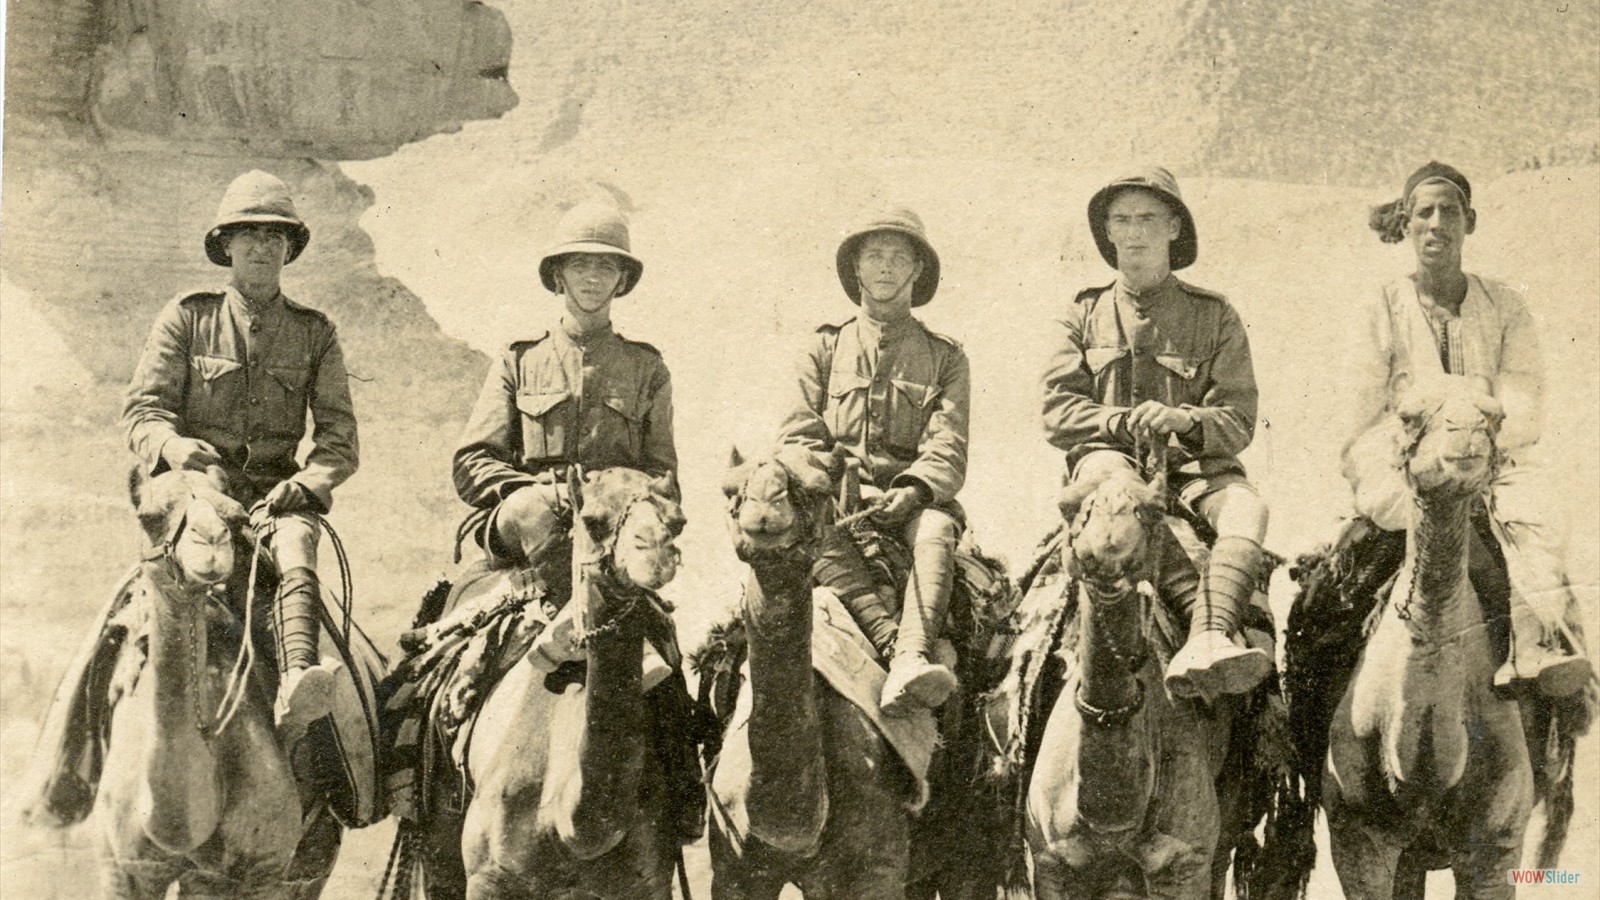 Left to right - Whitfield Bannister, Frank Fowlow, Thomas Cook and Cecil Green in Egypt during World War I